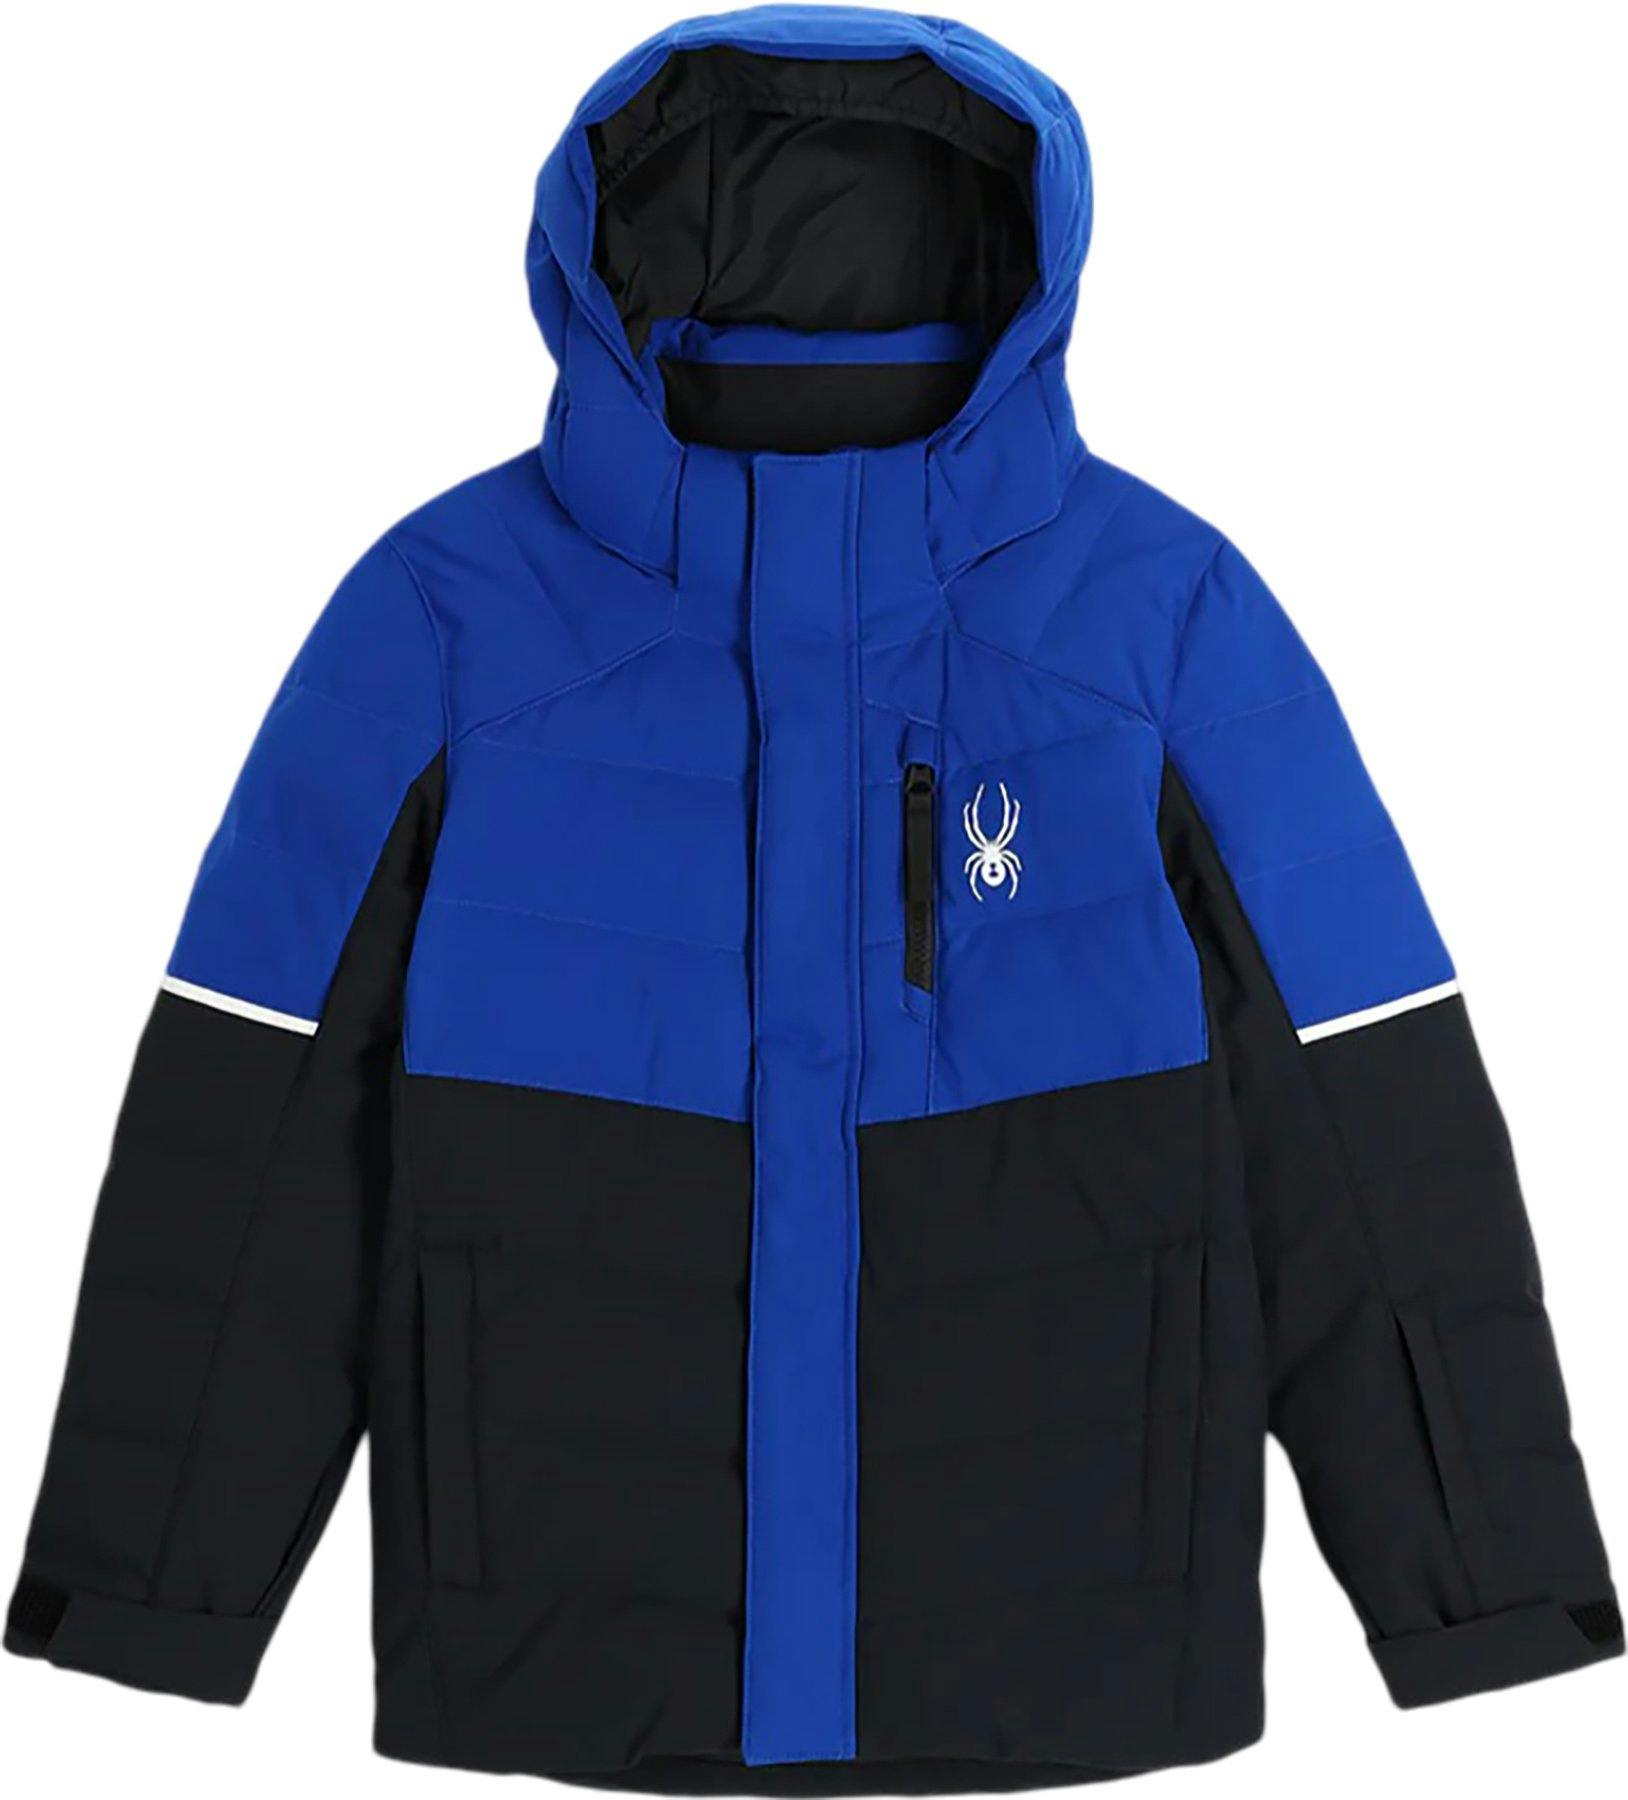 Product image for Impulse Synthetic Down Jacket - Boys